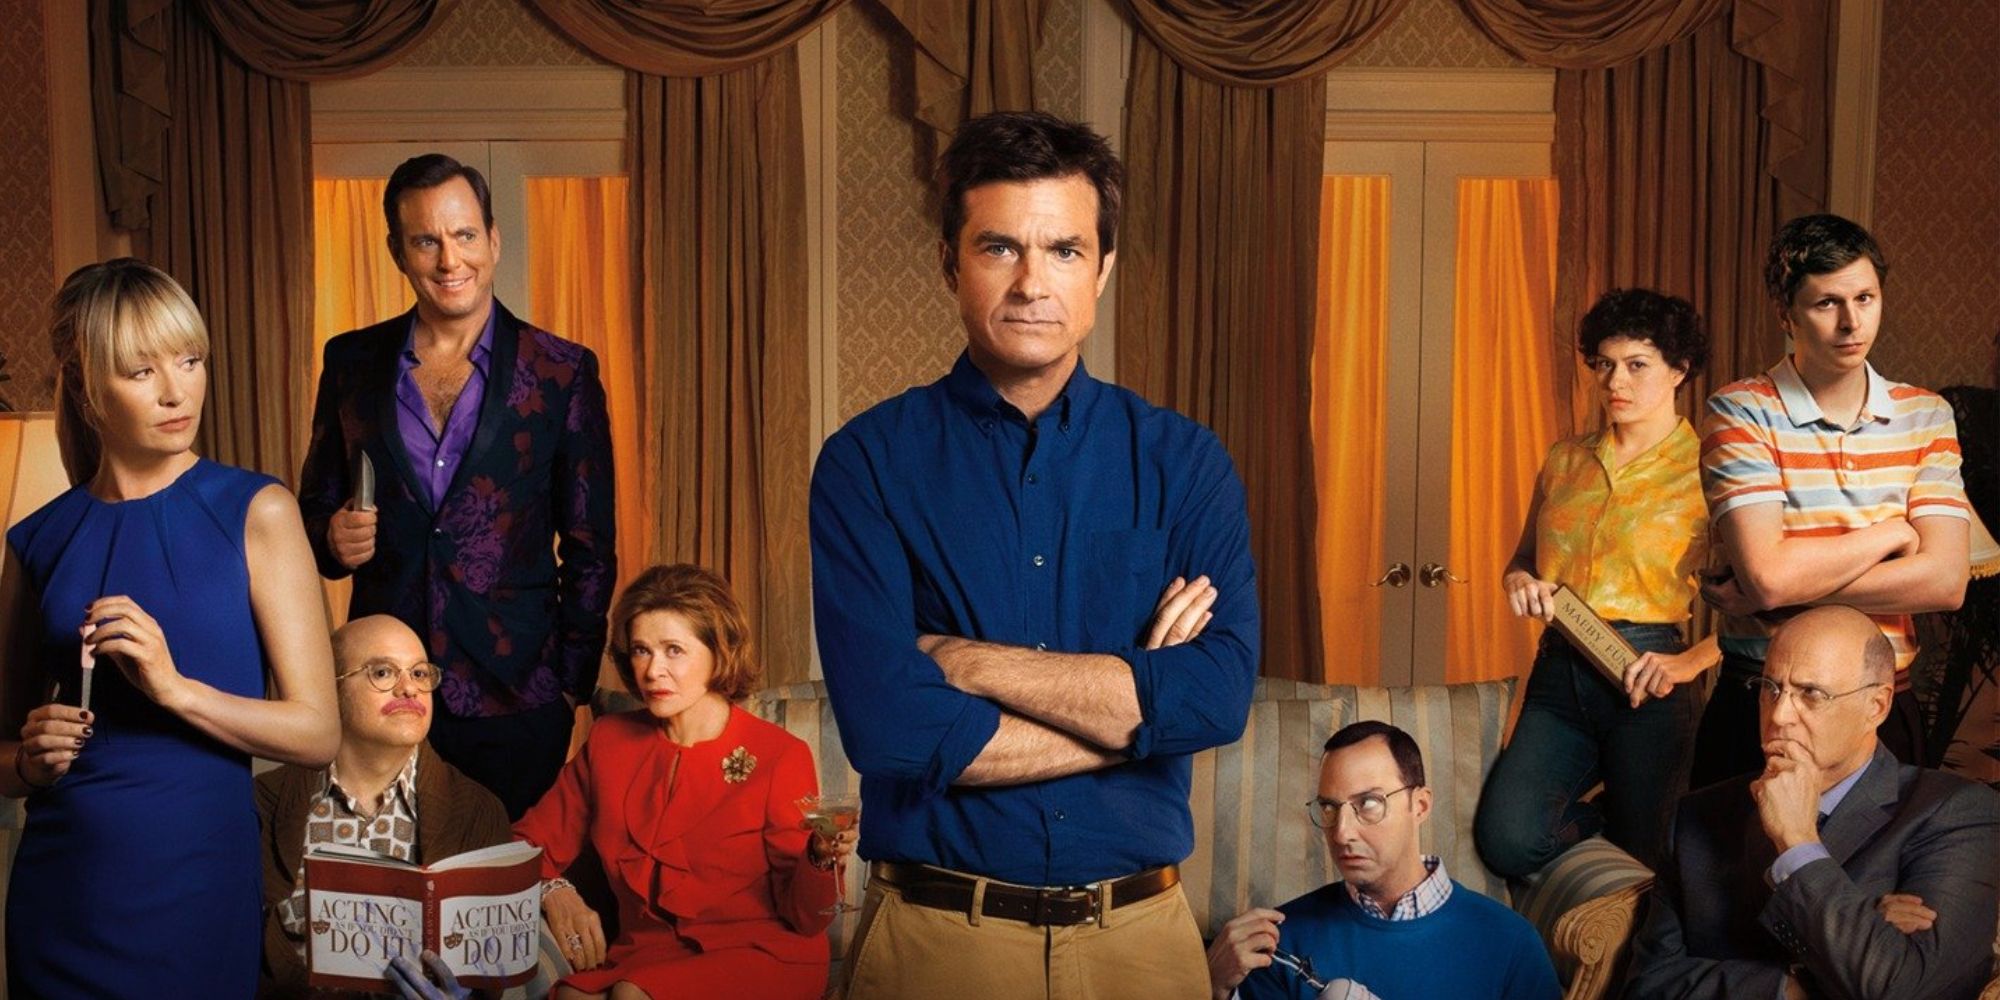 The Bluth family in Arrested Development